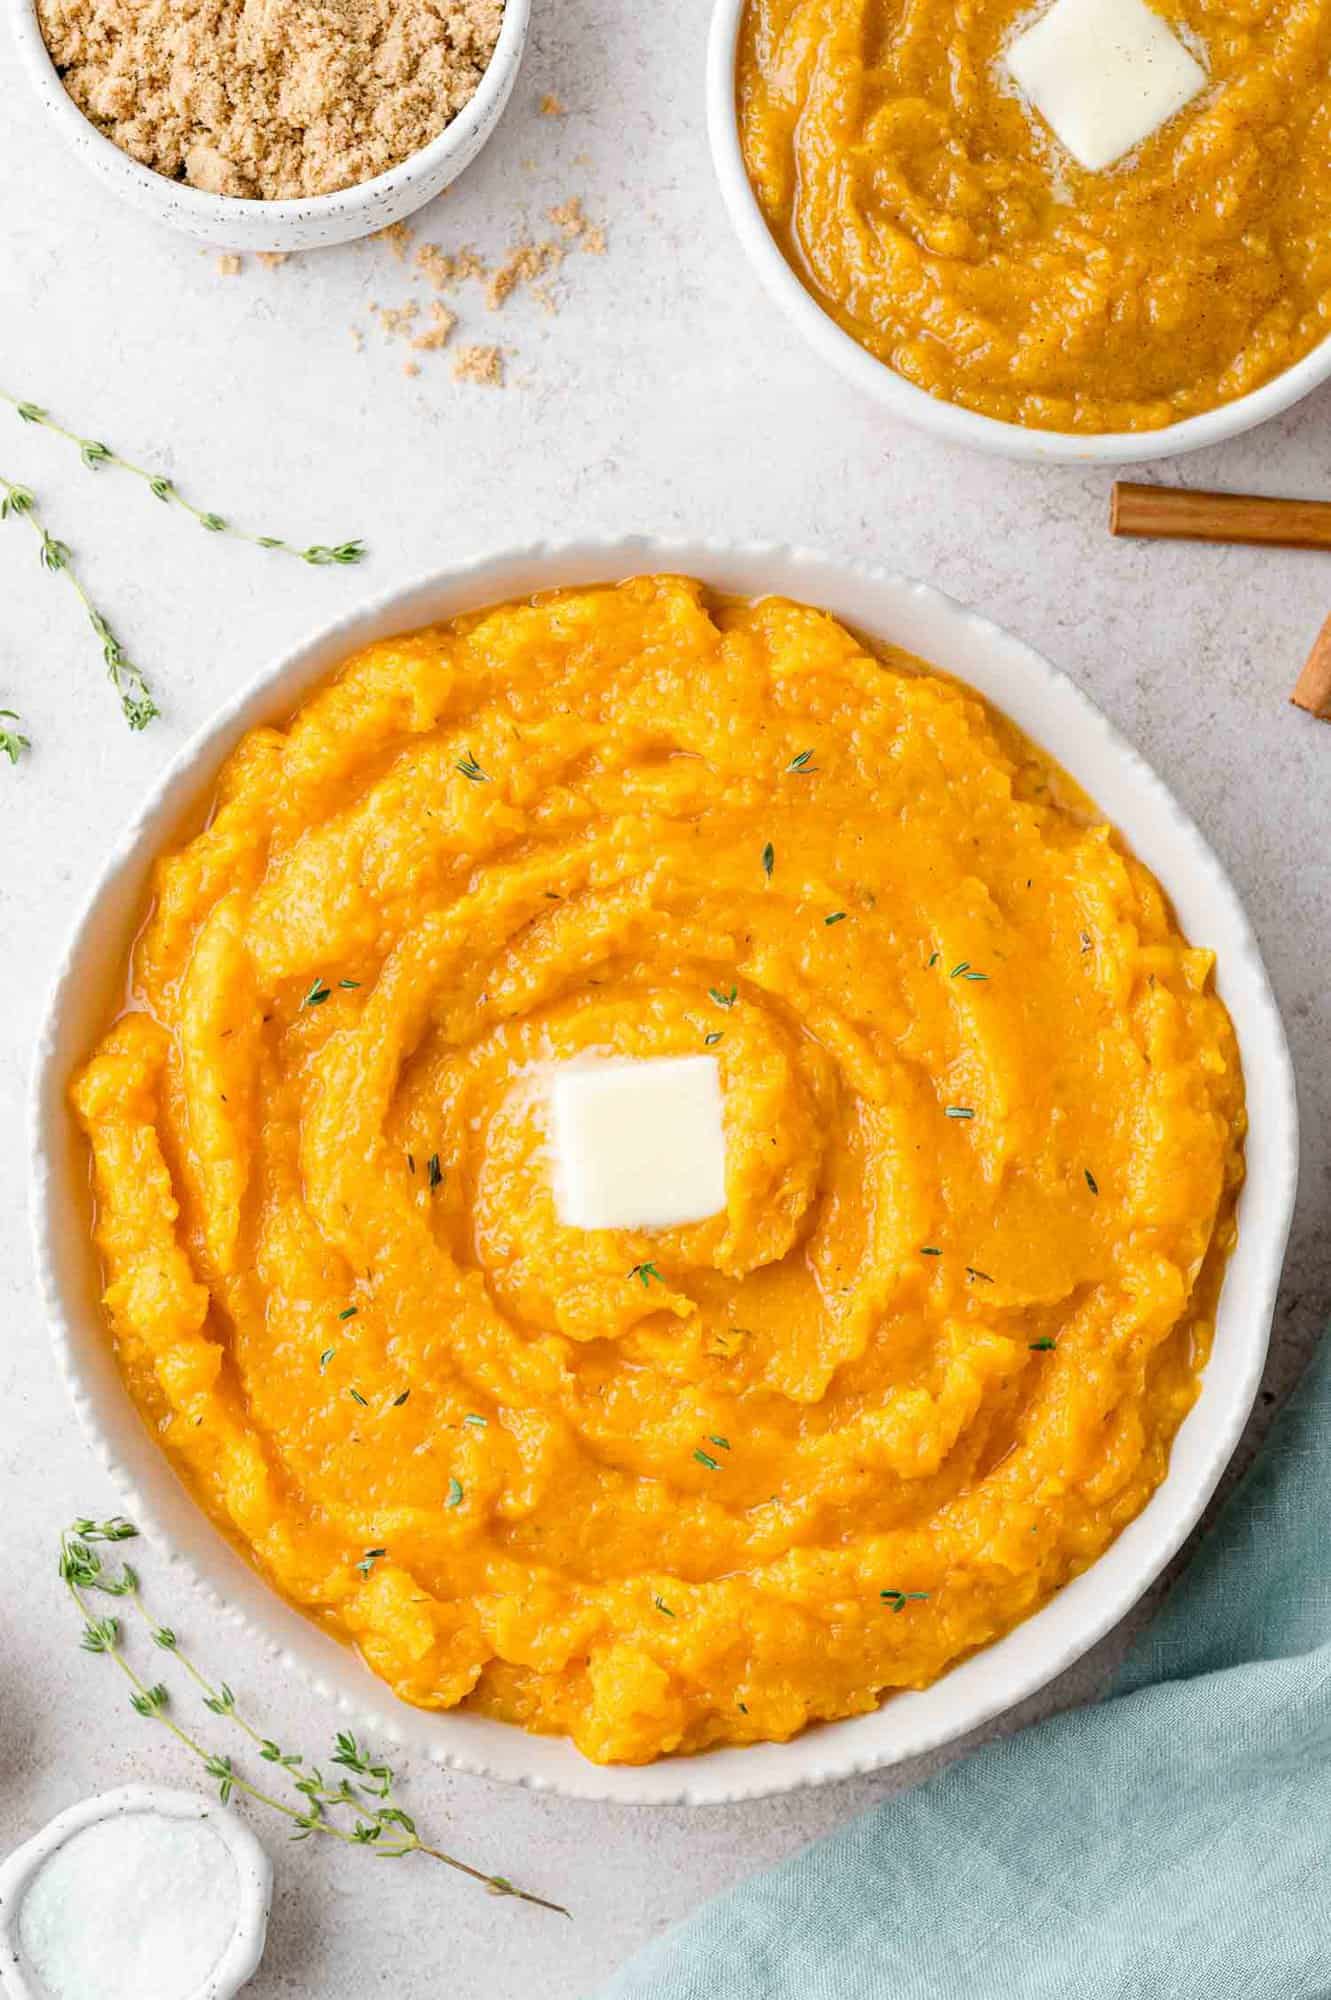 Savory mashed butternut squash in a large bowl, topped with butter. Sweet version also partially visible.